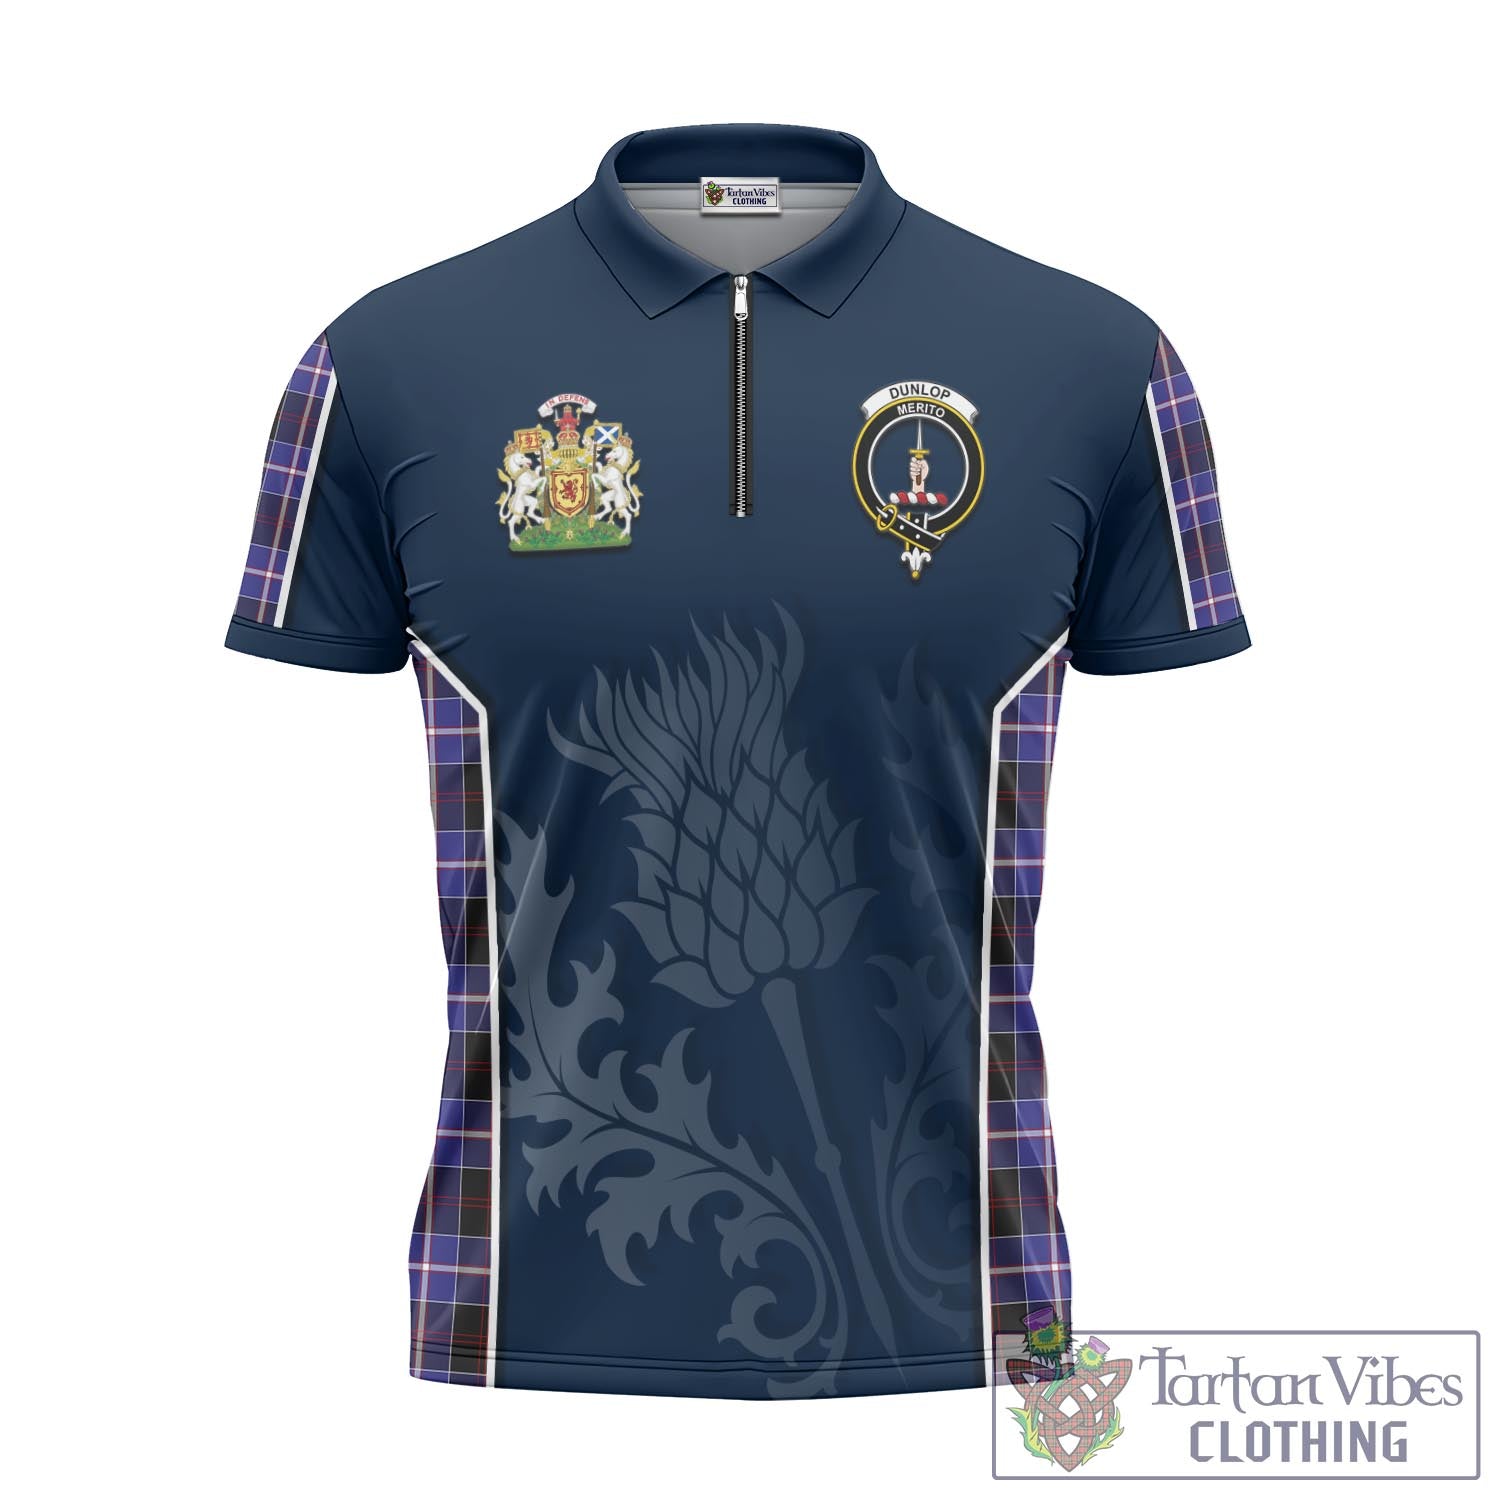 Tartan Vibes Clothing Dunlop Modern Tartan Zipper Polo Shirt with Family Crest and Scottish Thistle Vibes Sport Style